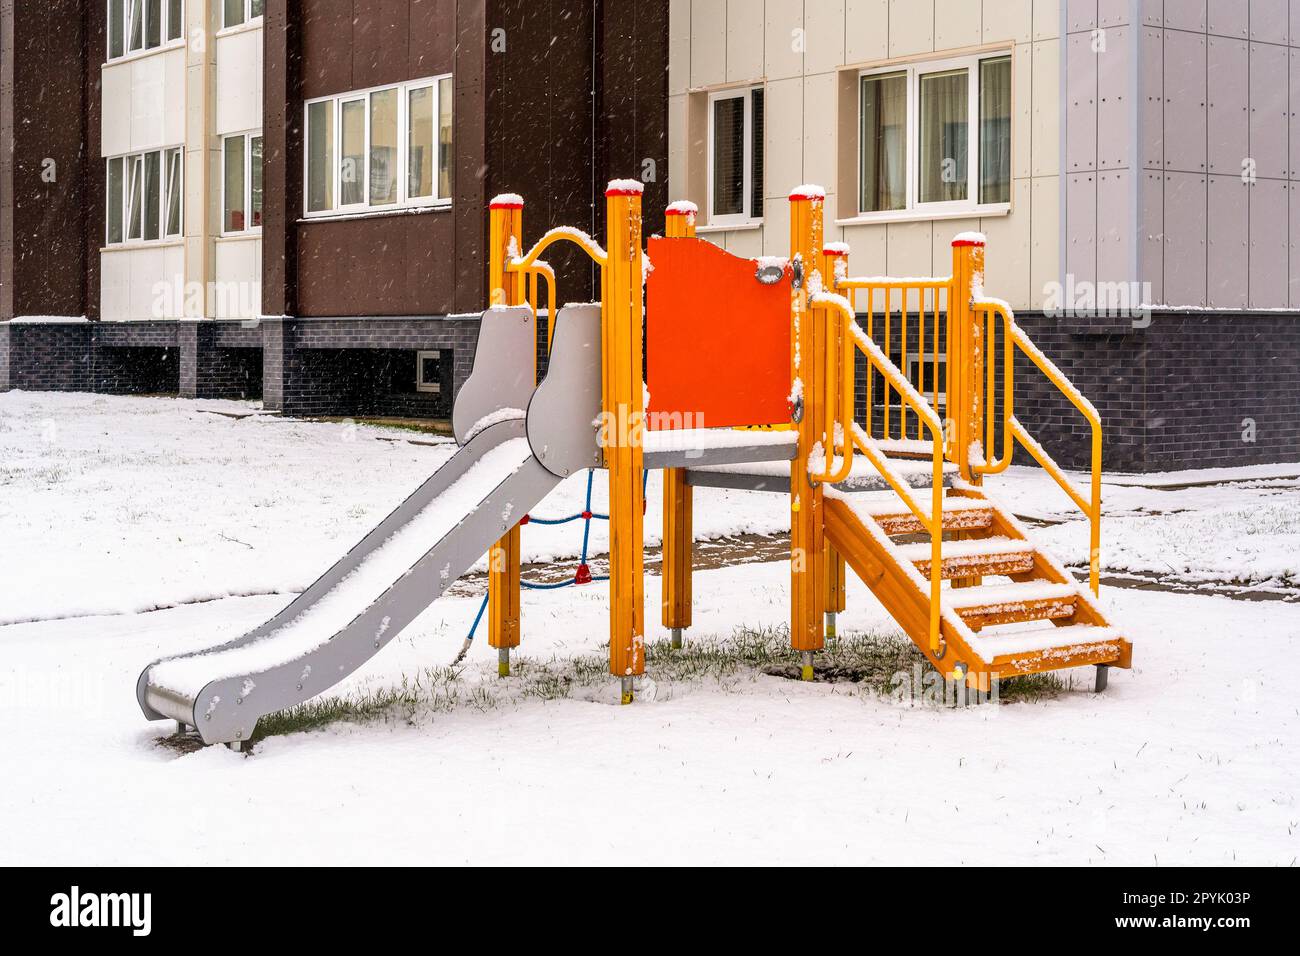 Play complex playground with slides and stairs in the winter city Stock Photo